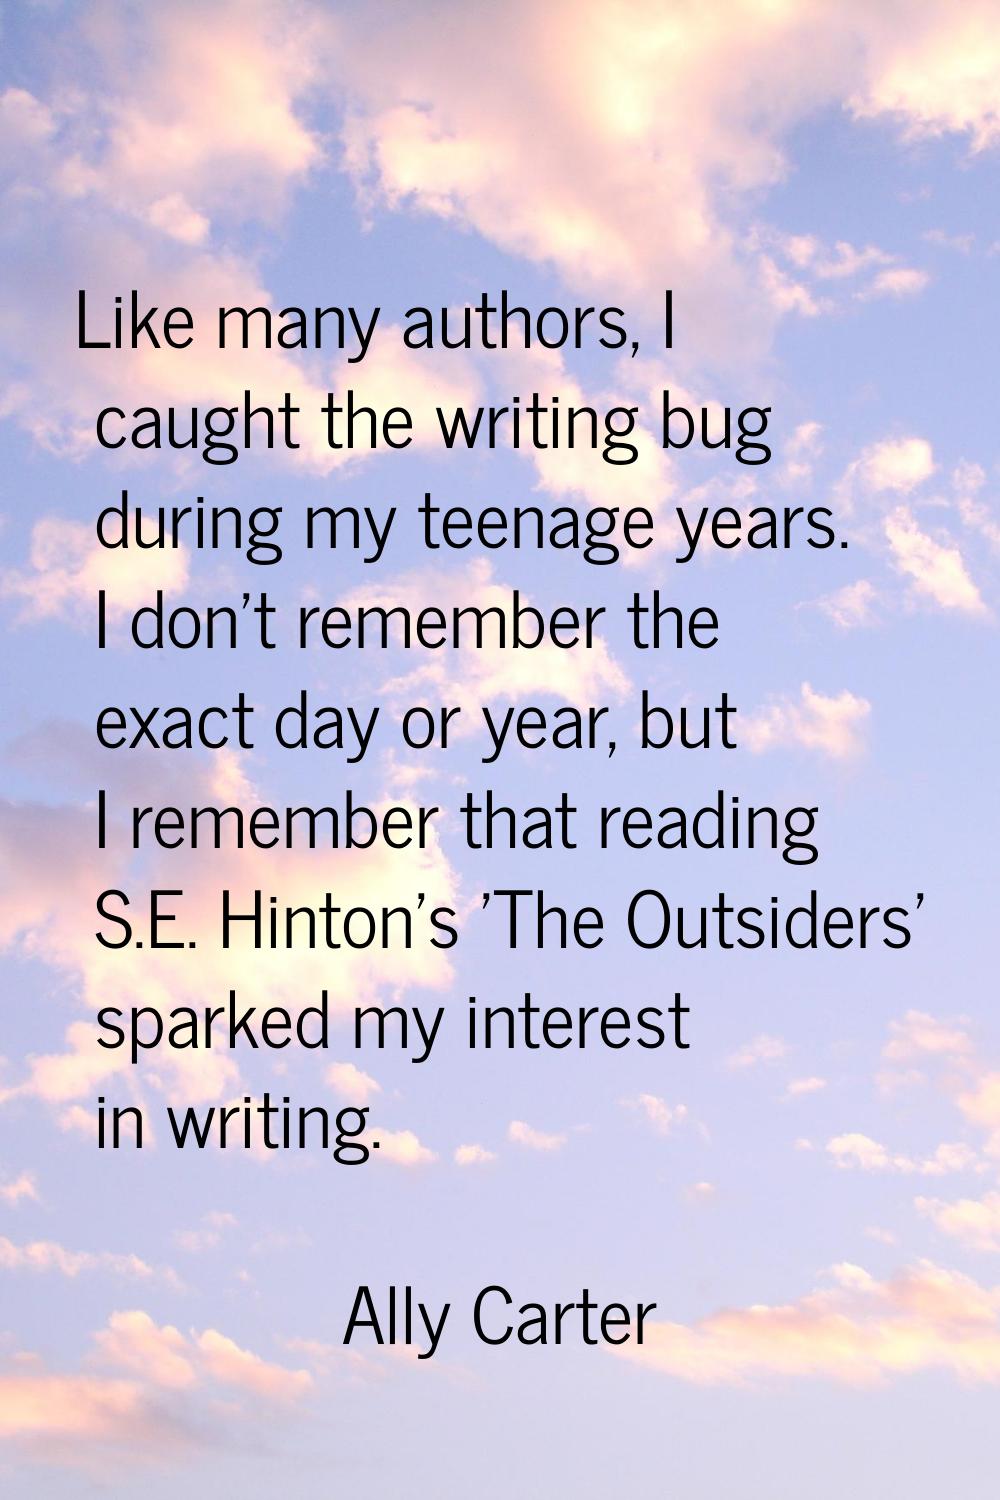 Like many authors, I caught the writing bug during my teenage years. I don't remember the exact day